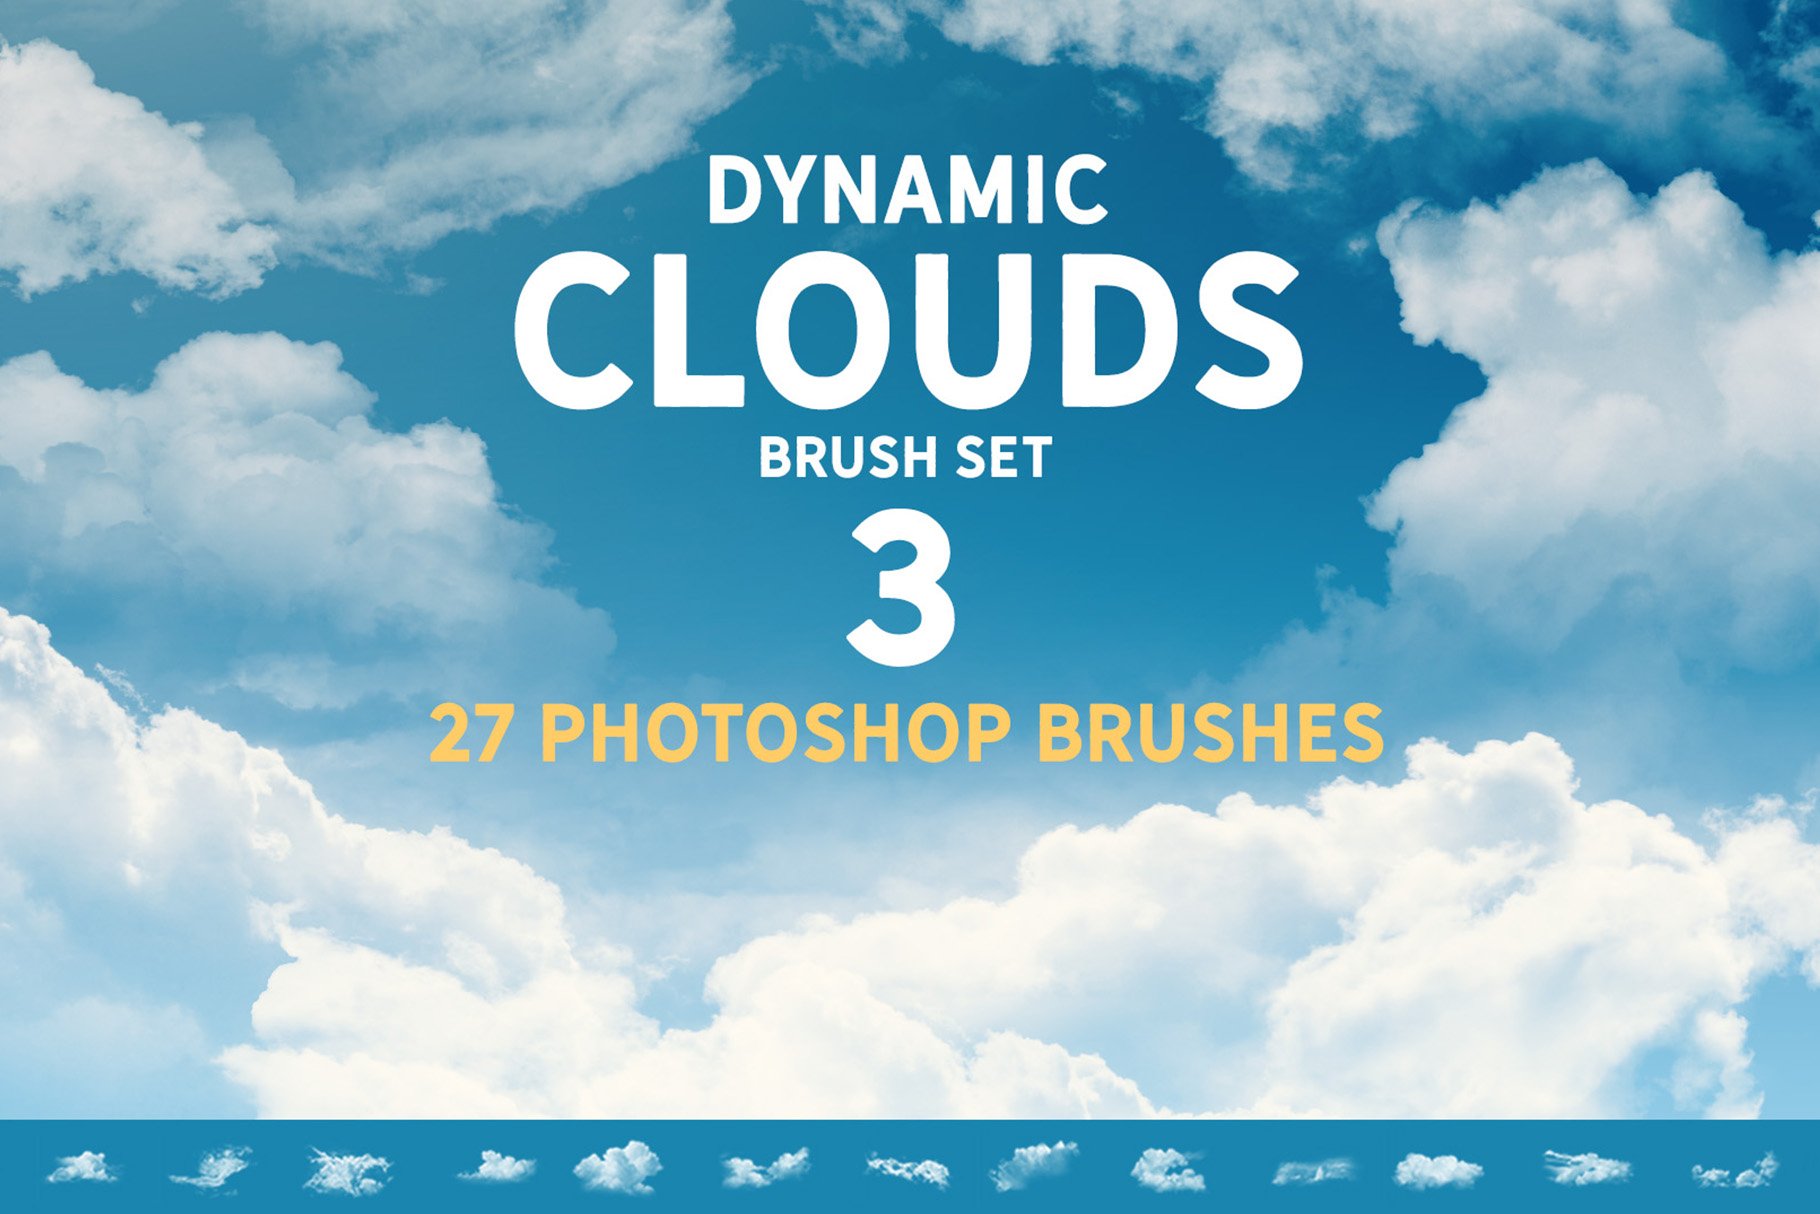 Dynamic Clouds Brush set 3cover image.